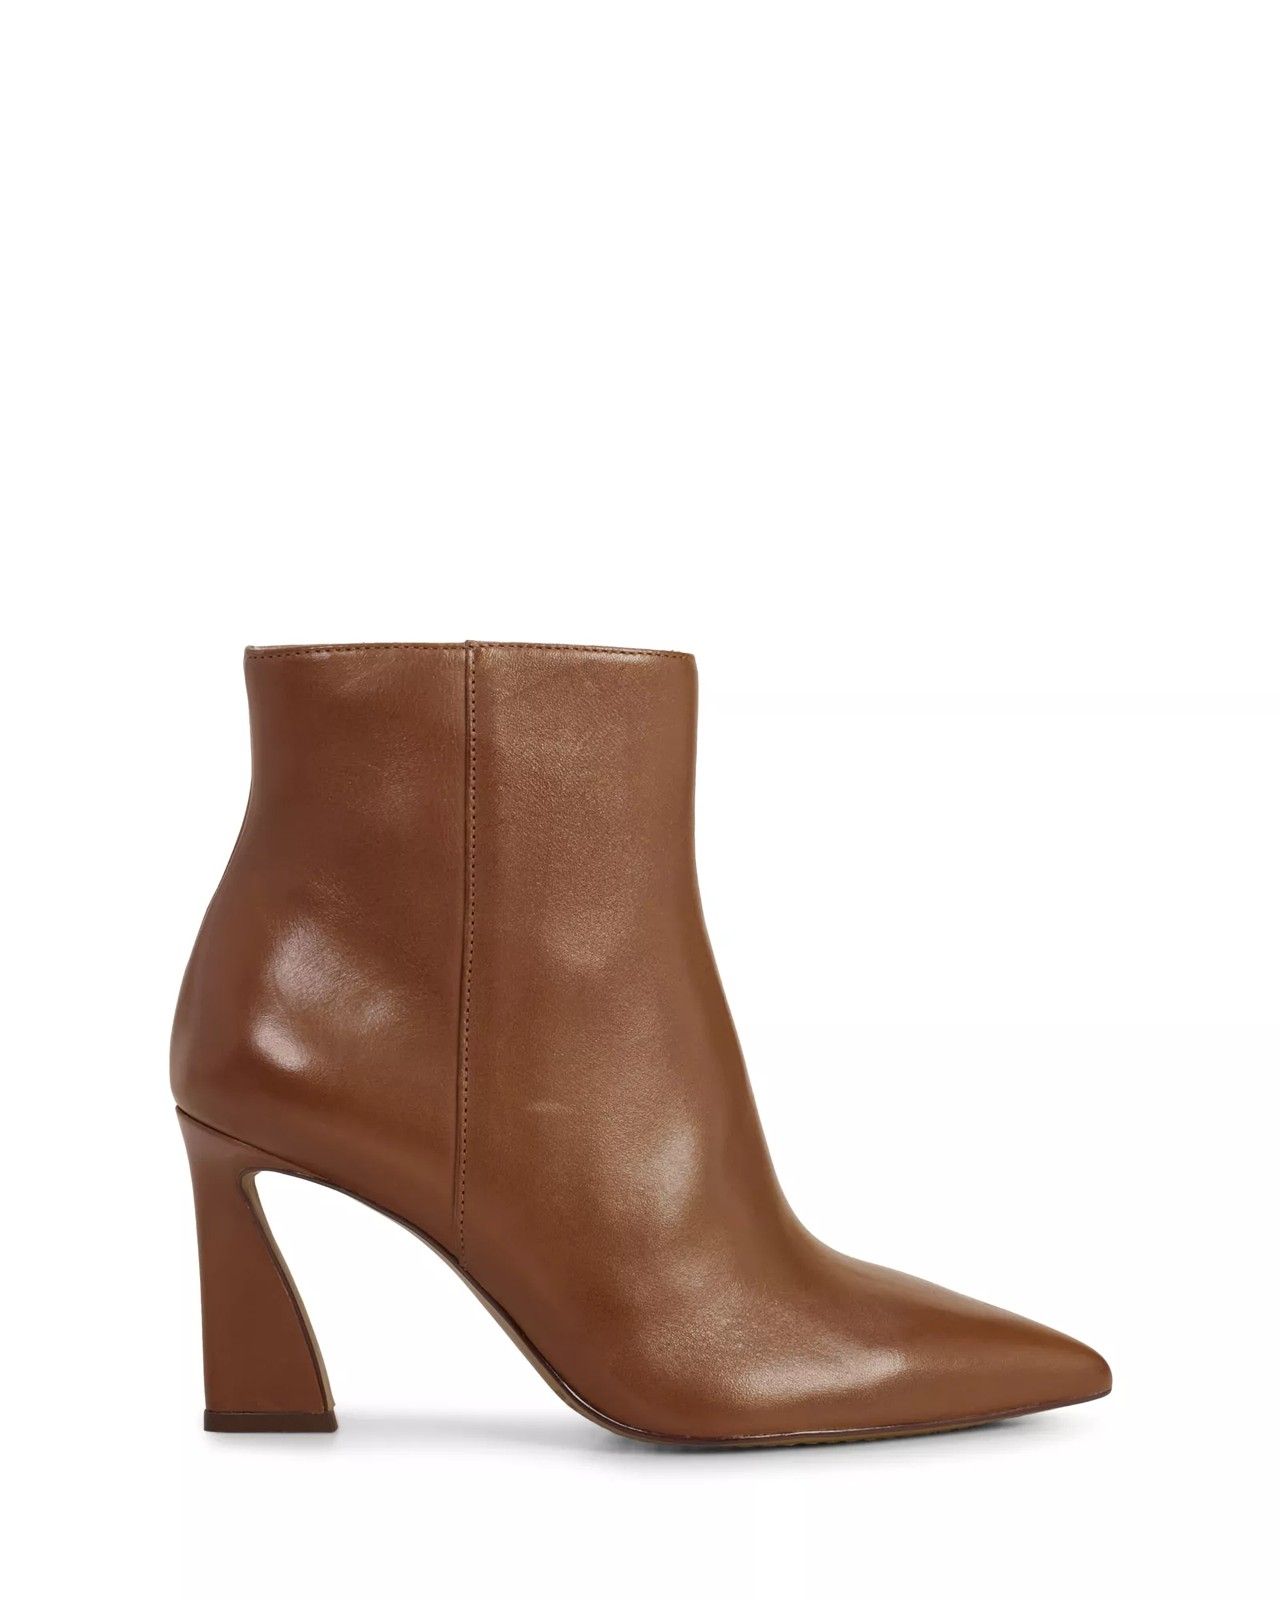 Vince Camuto Nashville Bootie by Dress Up Buttercup | Vince Camuto